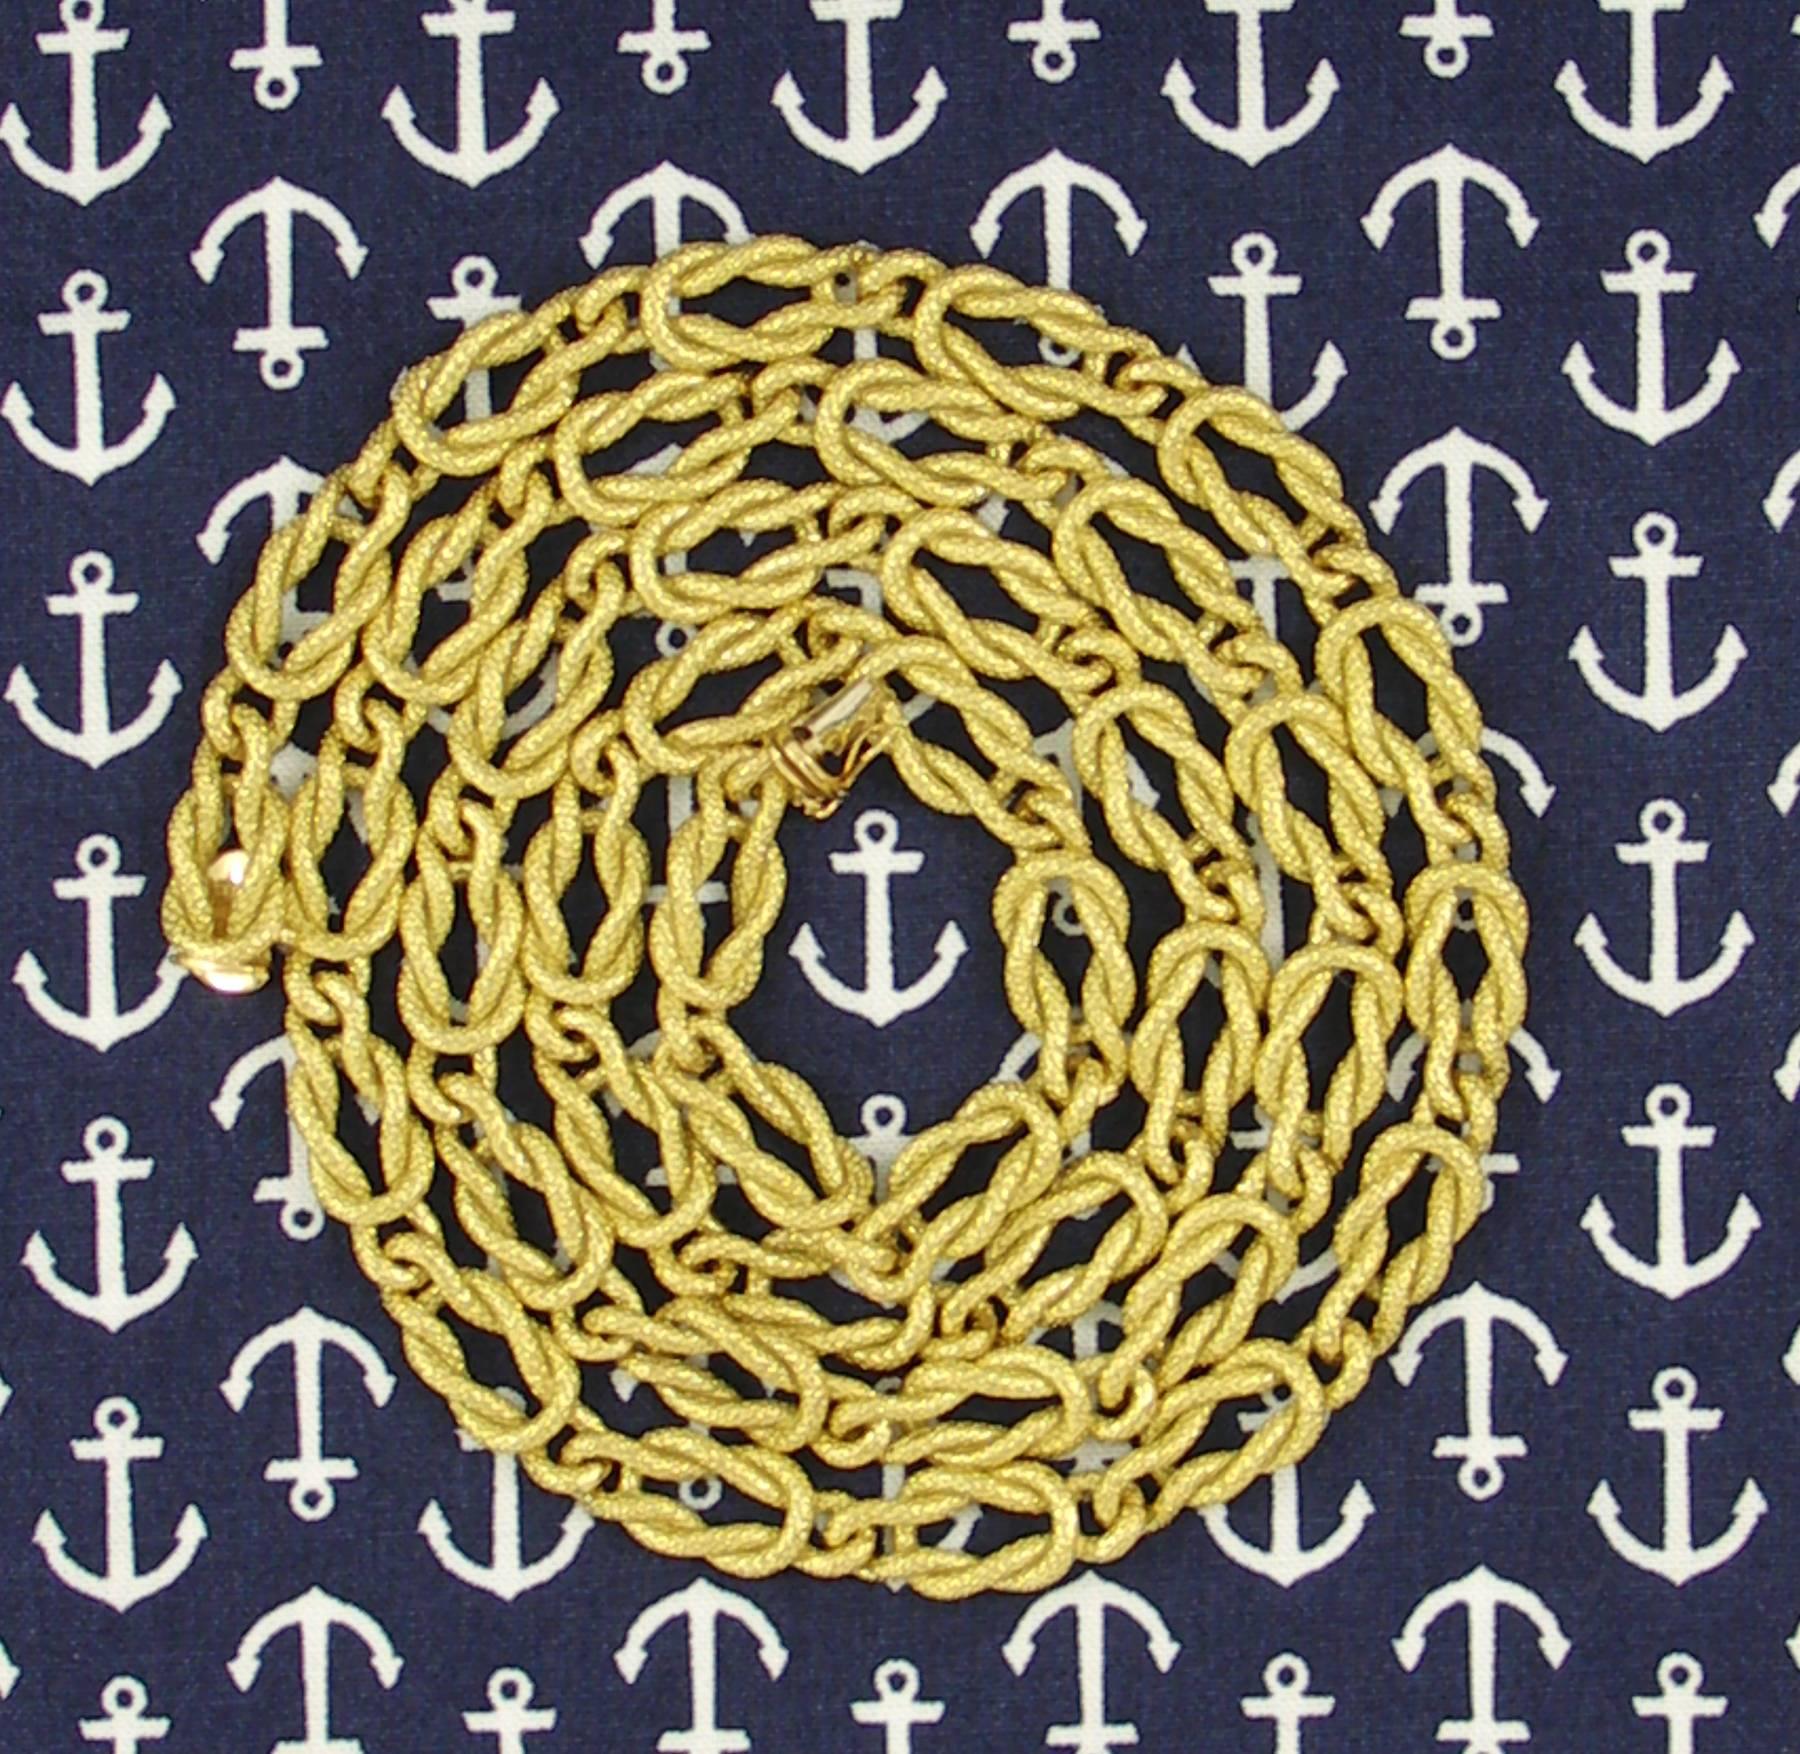 An 18K yellow gold necklace comprised of 40 links styled after the nautical, square knot. Each link measures 3/8 of an inch wide and 1 inch long, for an overall length of 32 inches.